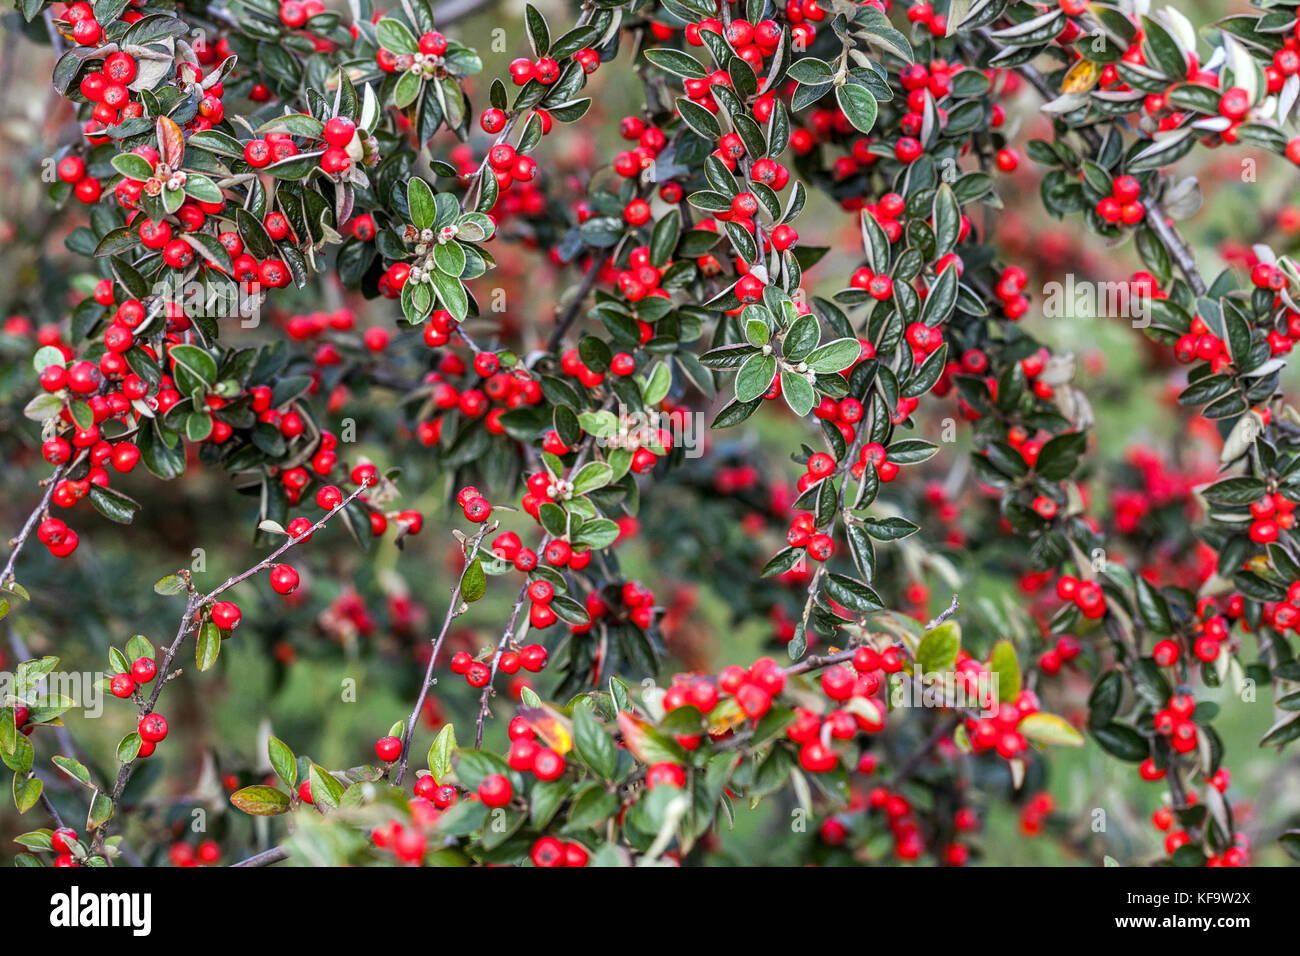 Cotoneaster induratus red berries, fruits on branch, shrub in autumn Cotoneaster berries Stock Photo